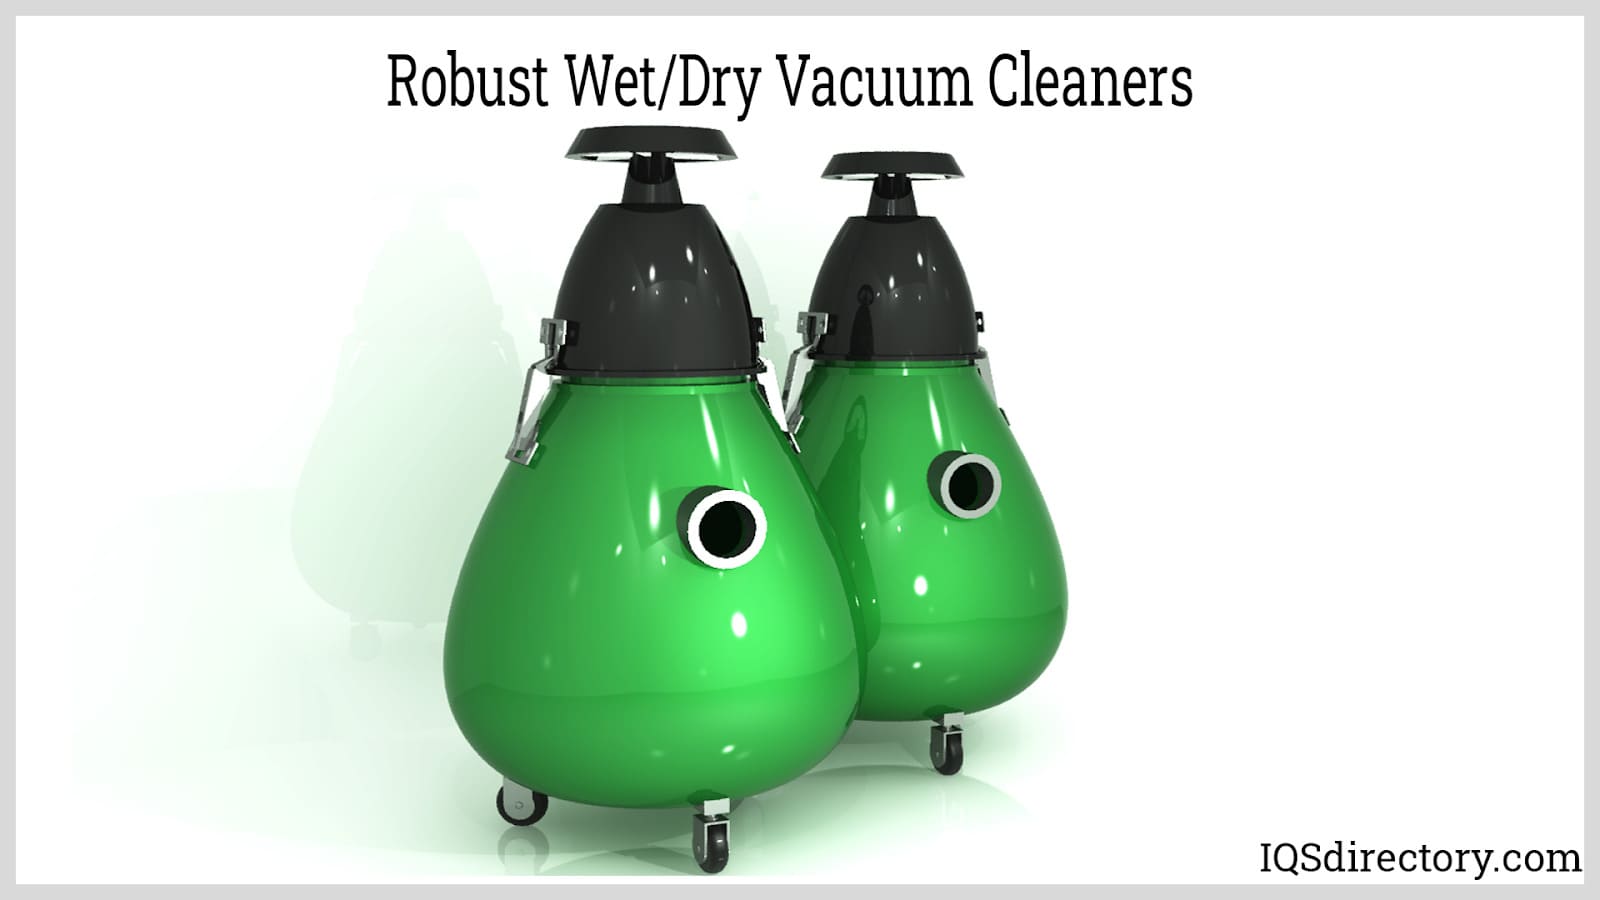 Robust Wet/Dry Vacuum Cleaners